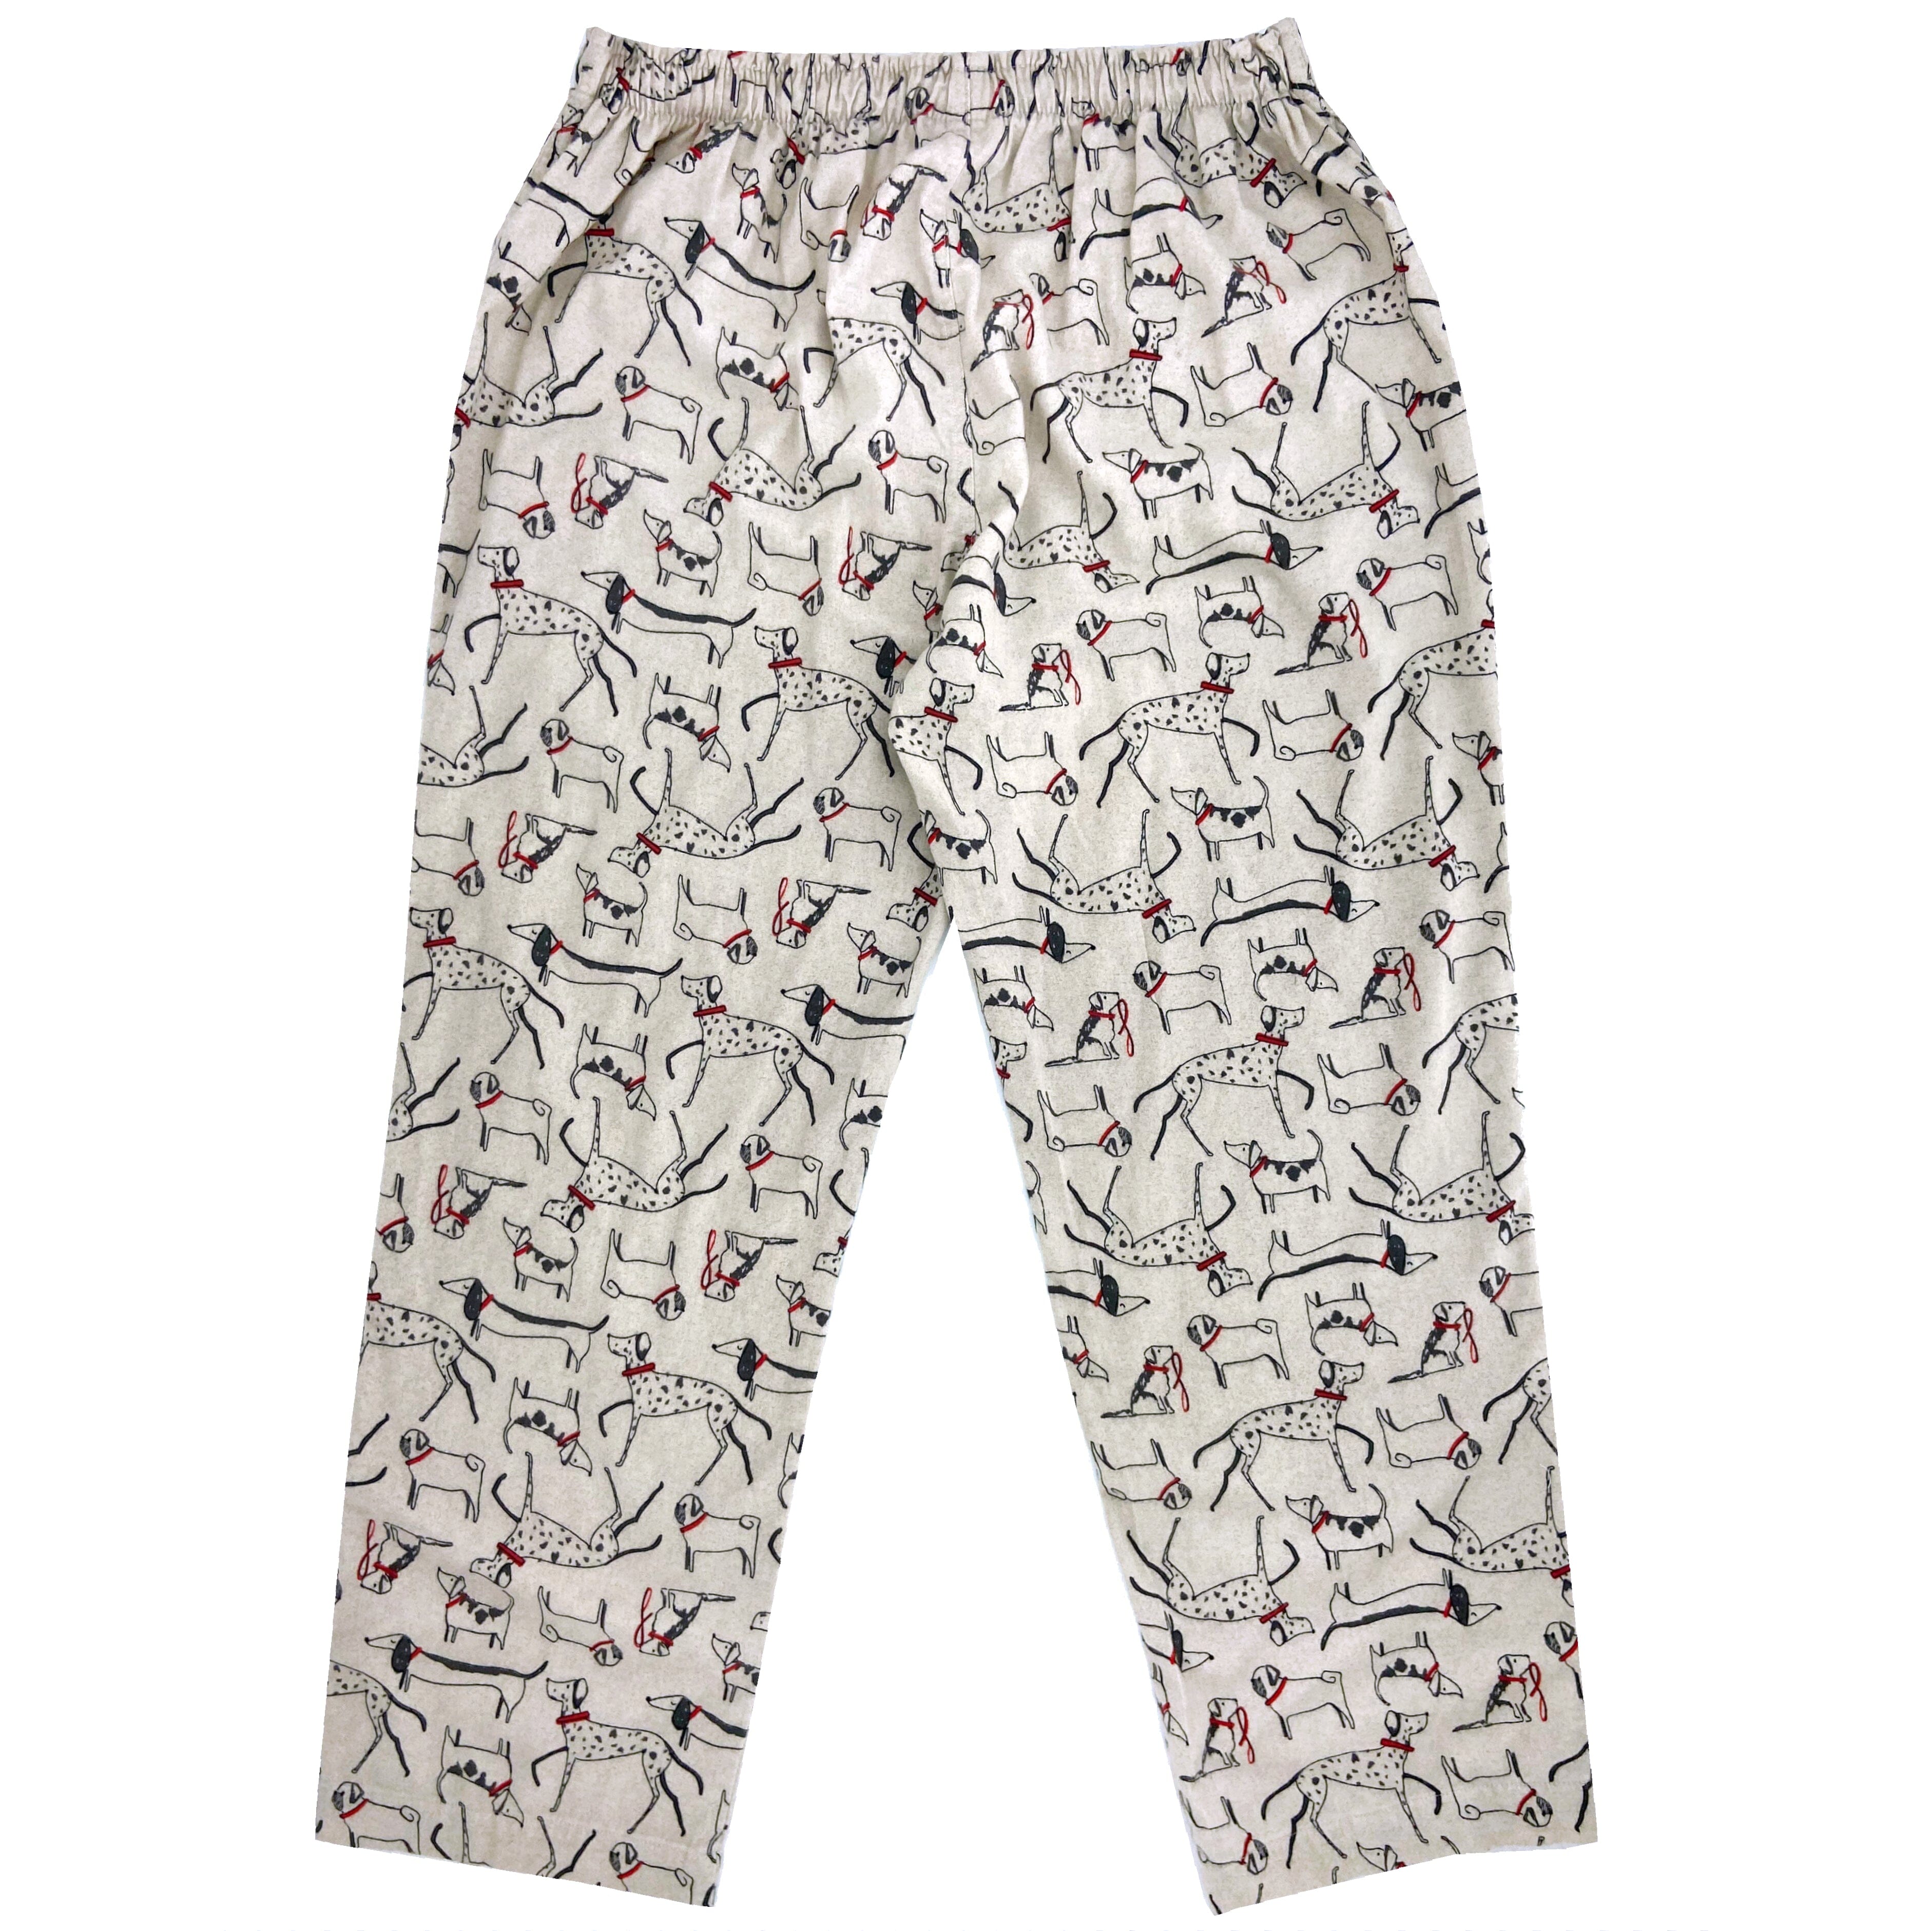 Men's Soft Comfy Grey Flannel Pajama Bottoms with Dog Printed Pattern